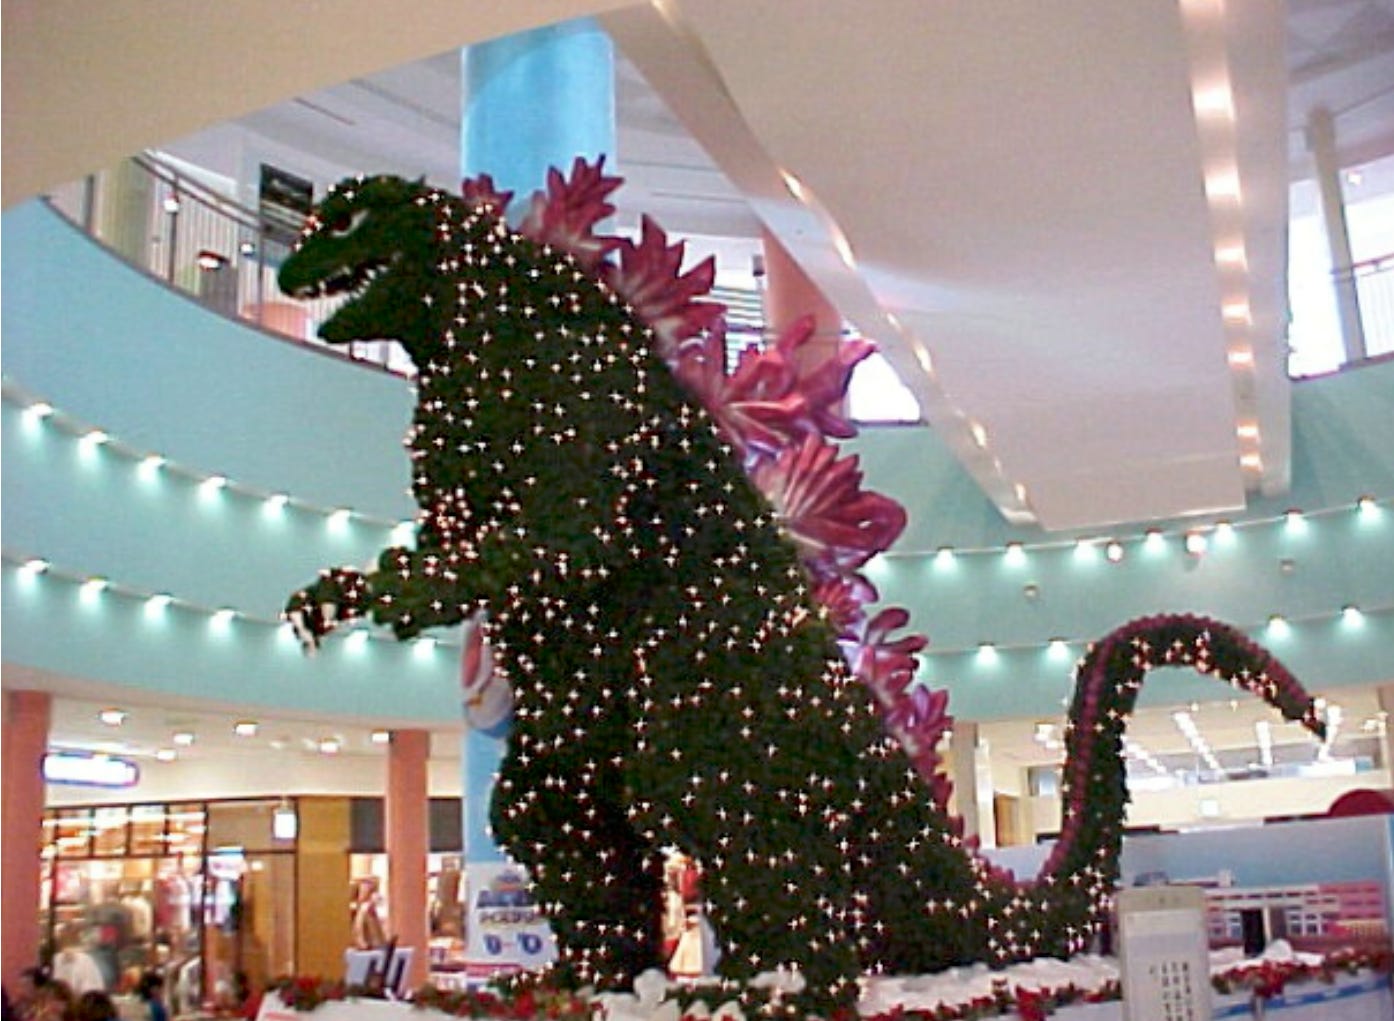 Photograph of a multi-story Christmas Tree in the shape of Godzilla adorned in fairy lights.